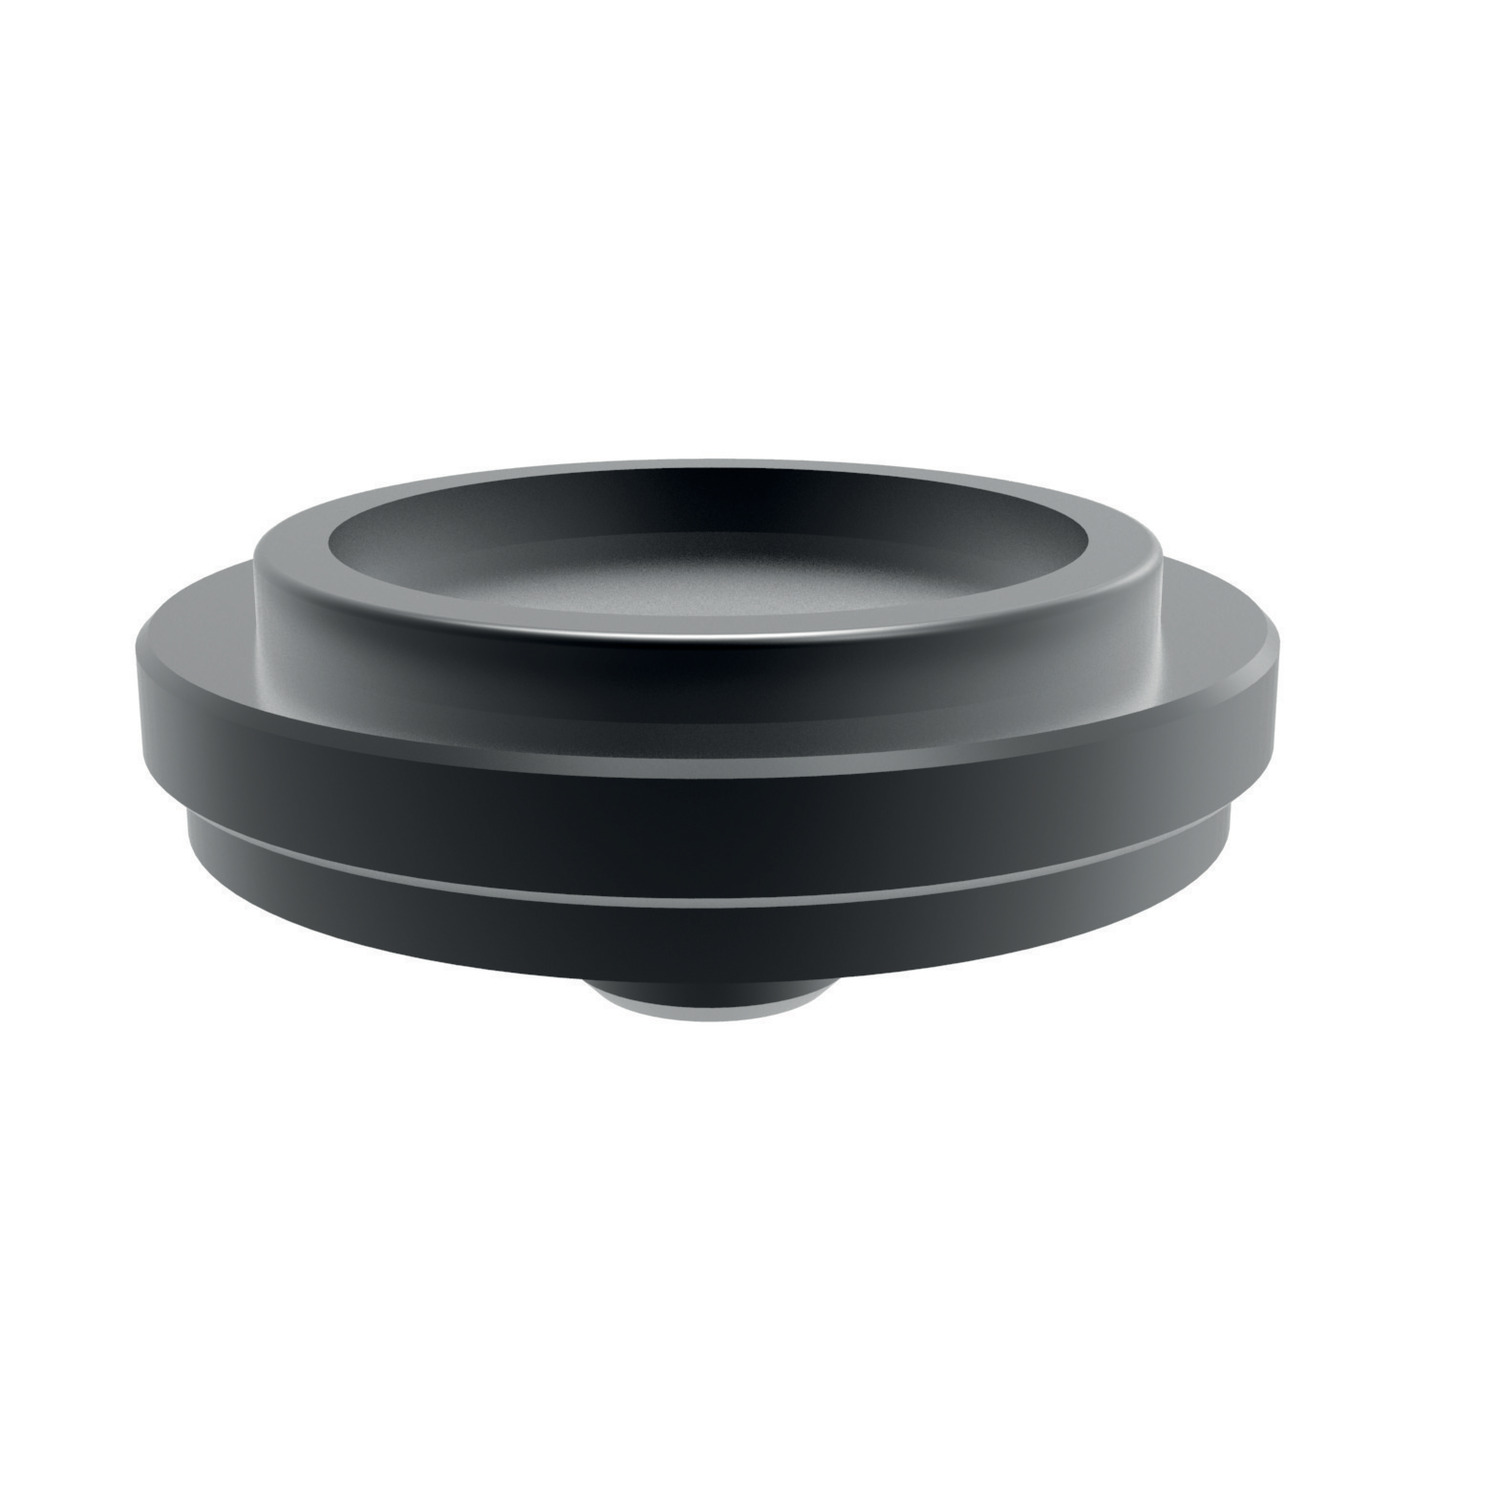 Product 15060, Centering Pad for screw jacks / 